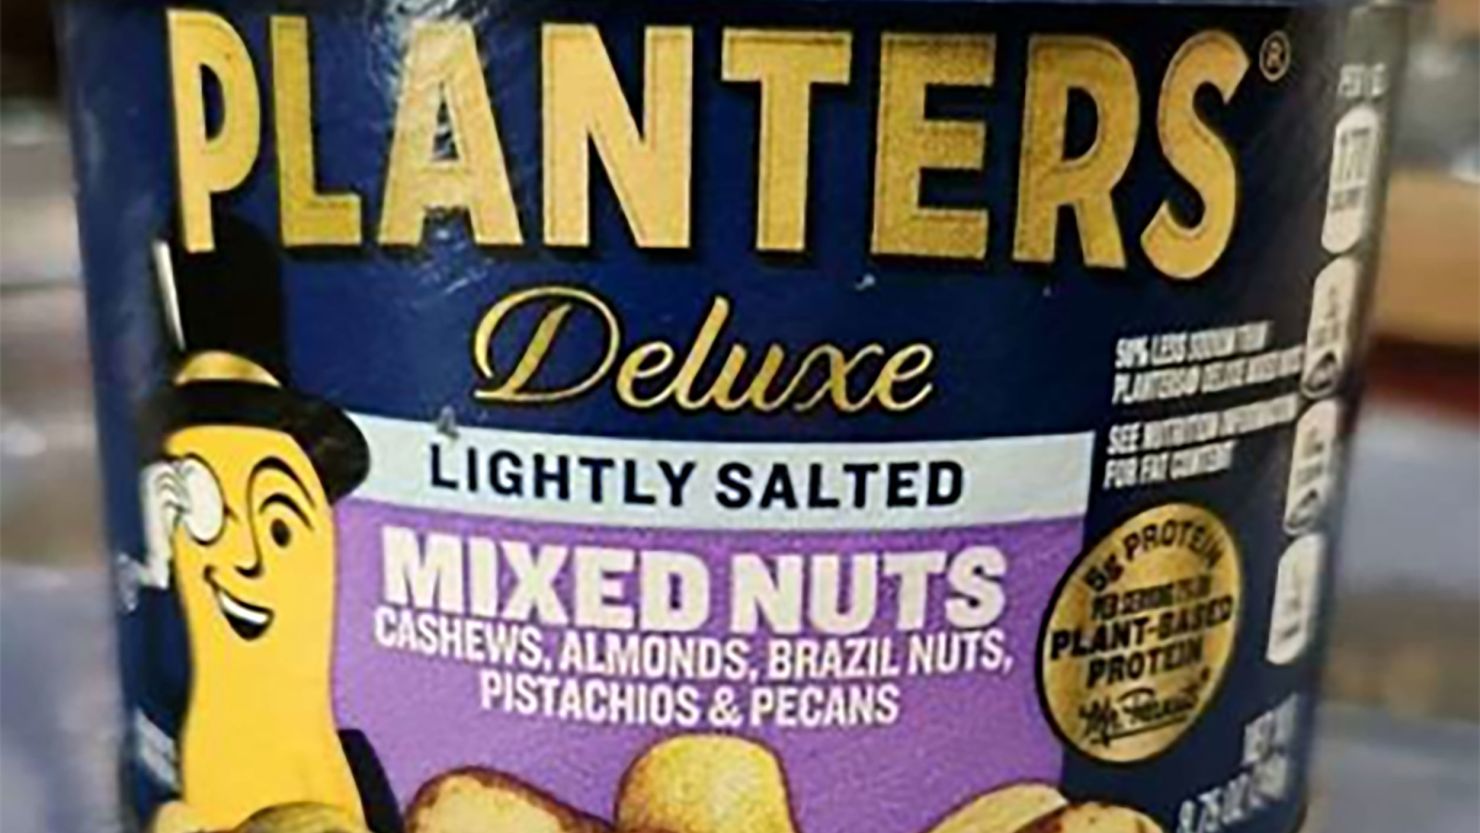 Two Planters nut products have been recalled due to possible contamination with the bacteria that causes listeria.